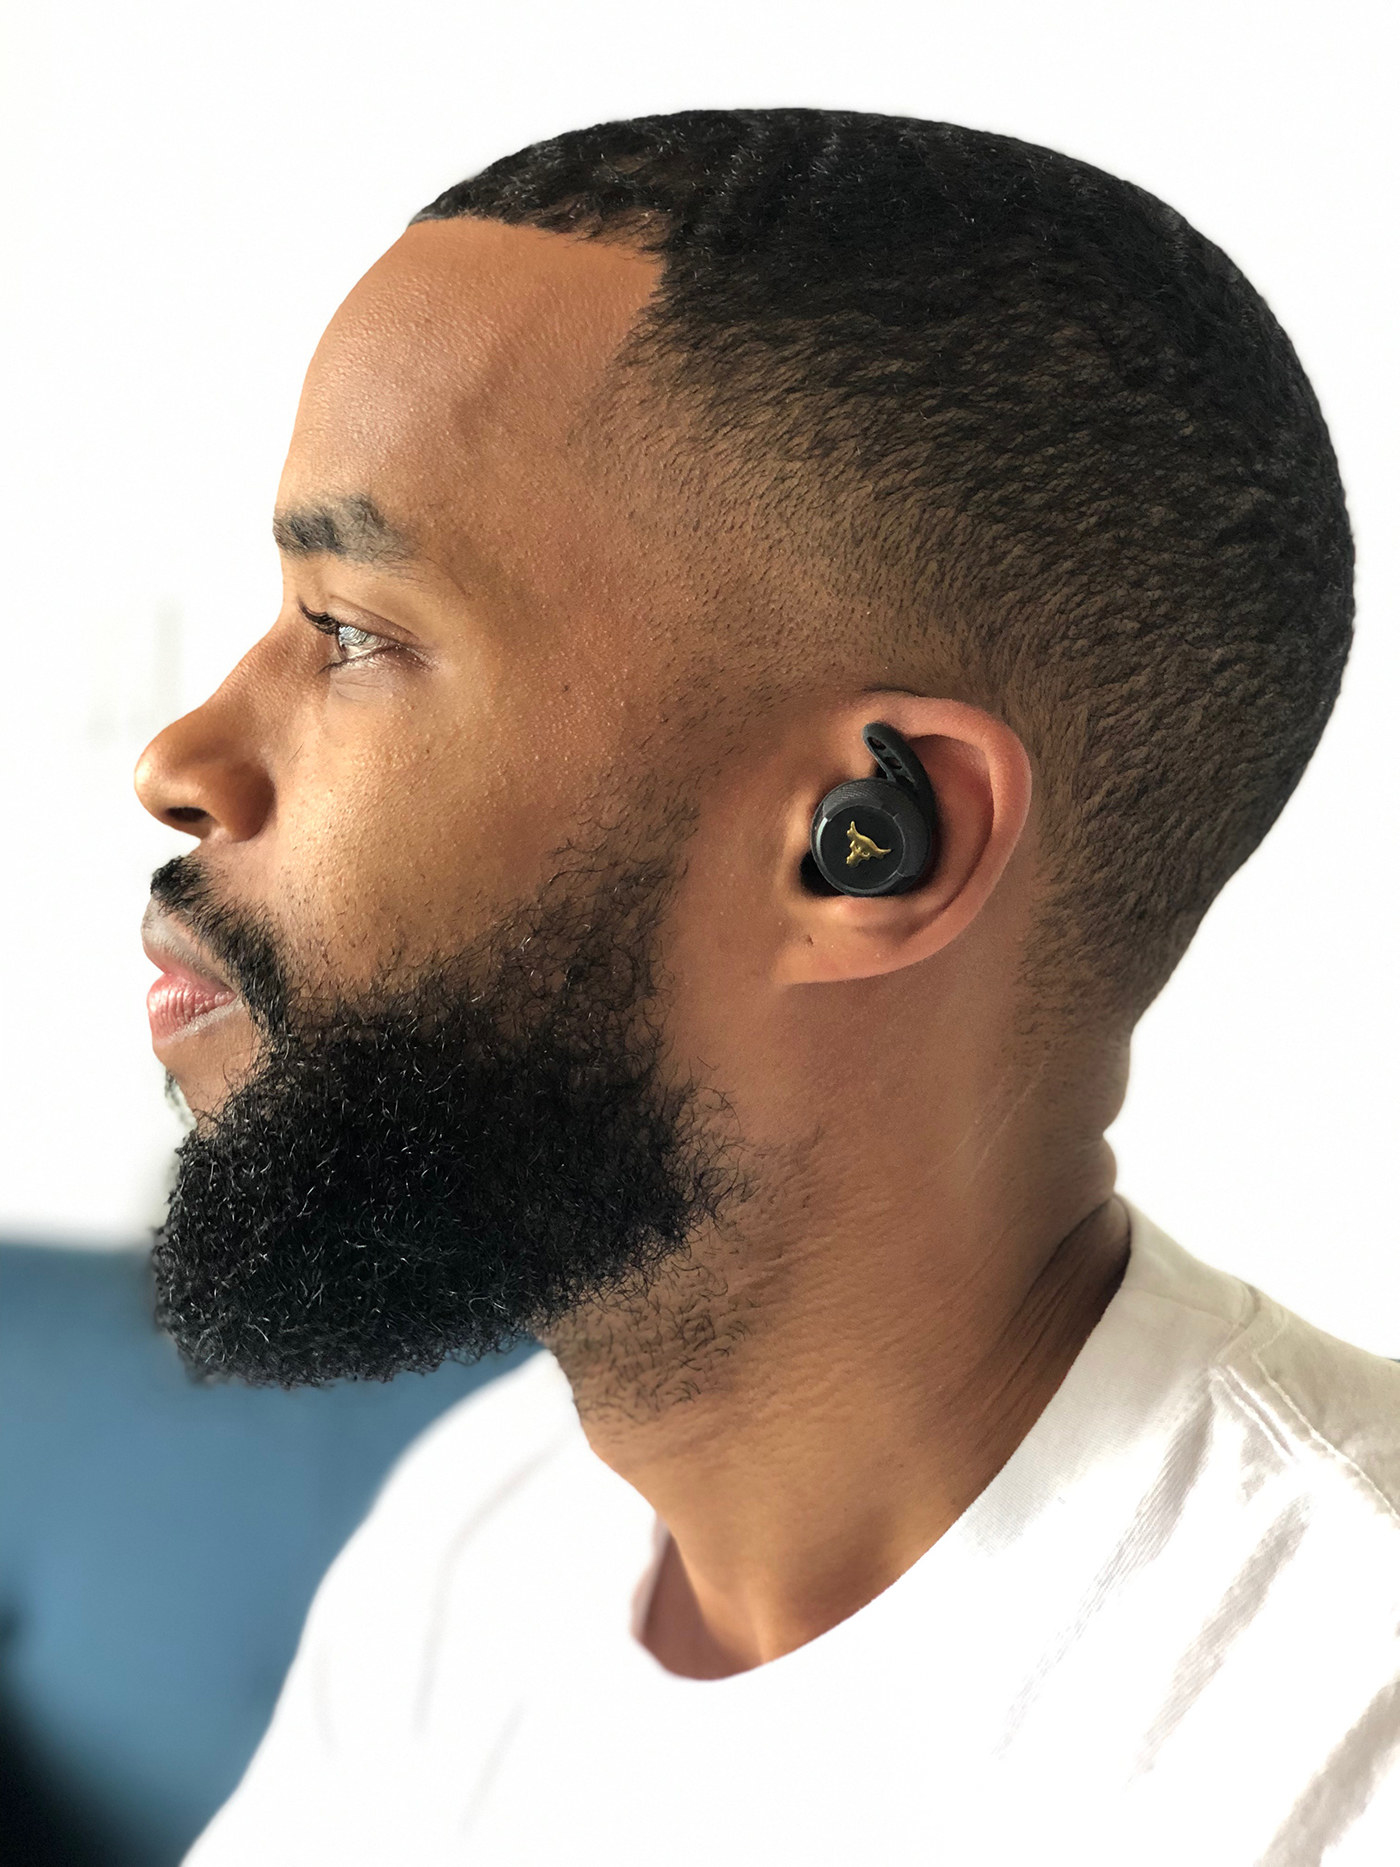 I Tried “The Rock” Johnson's New Under Armour Headphones And Here's How They Are